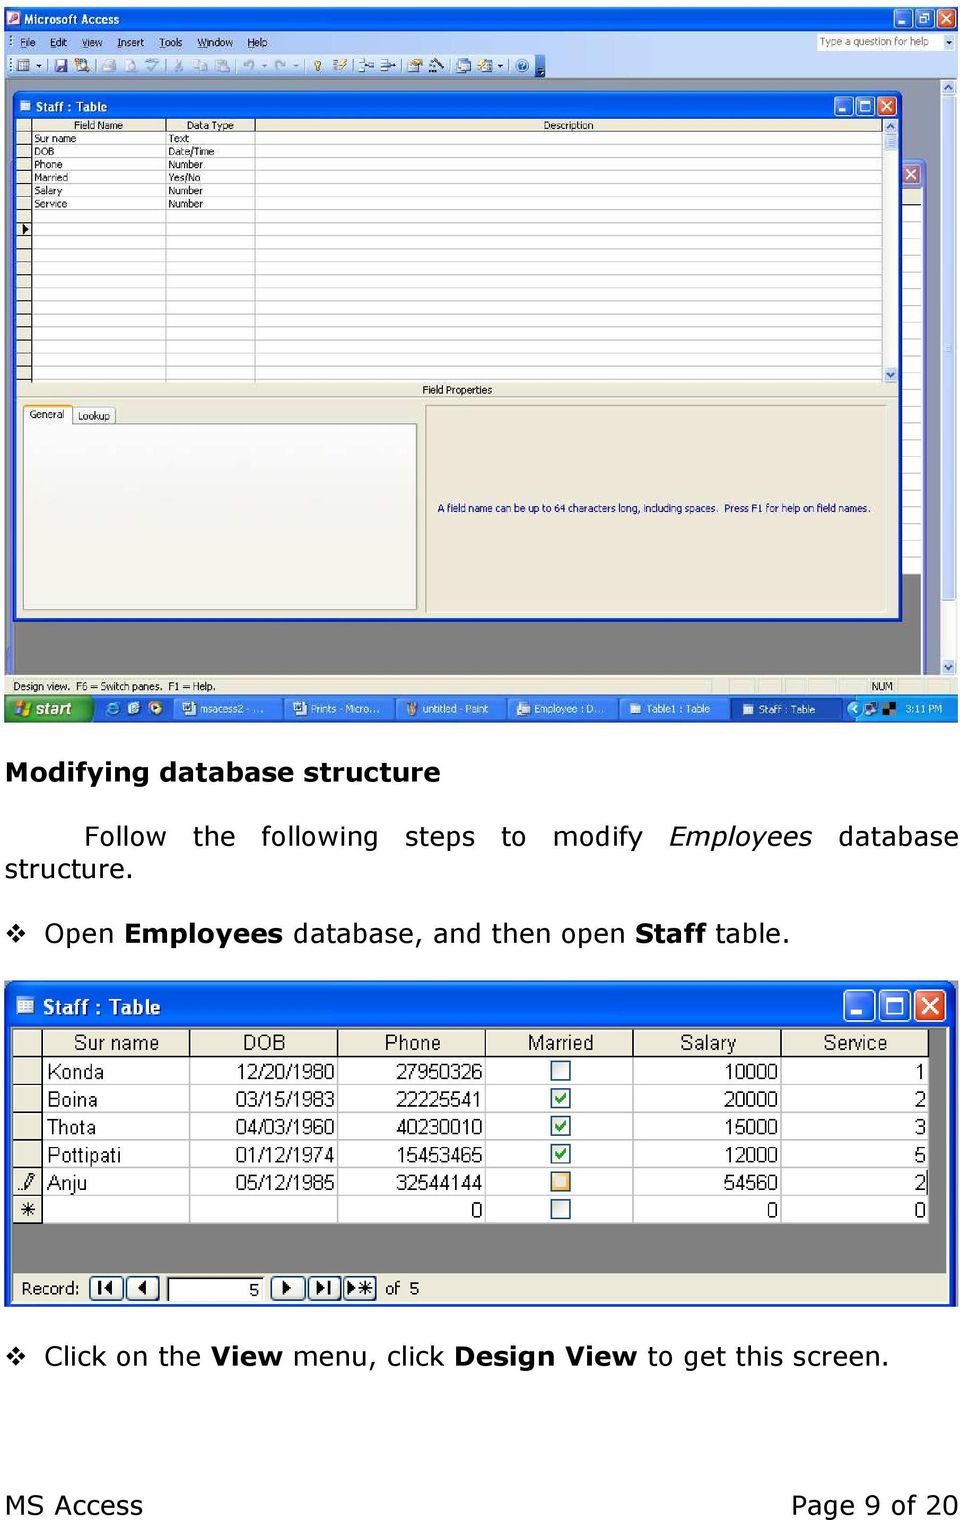 Open Employees database, and then open Staff table.